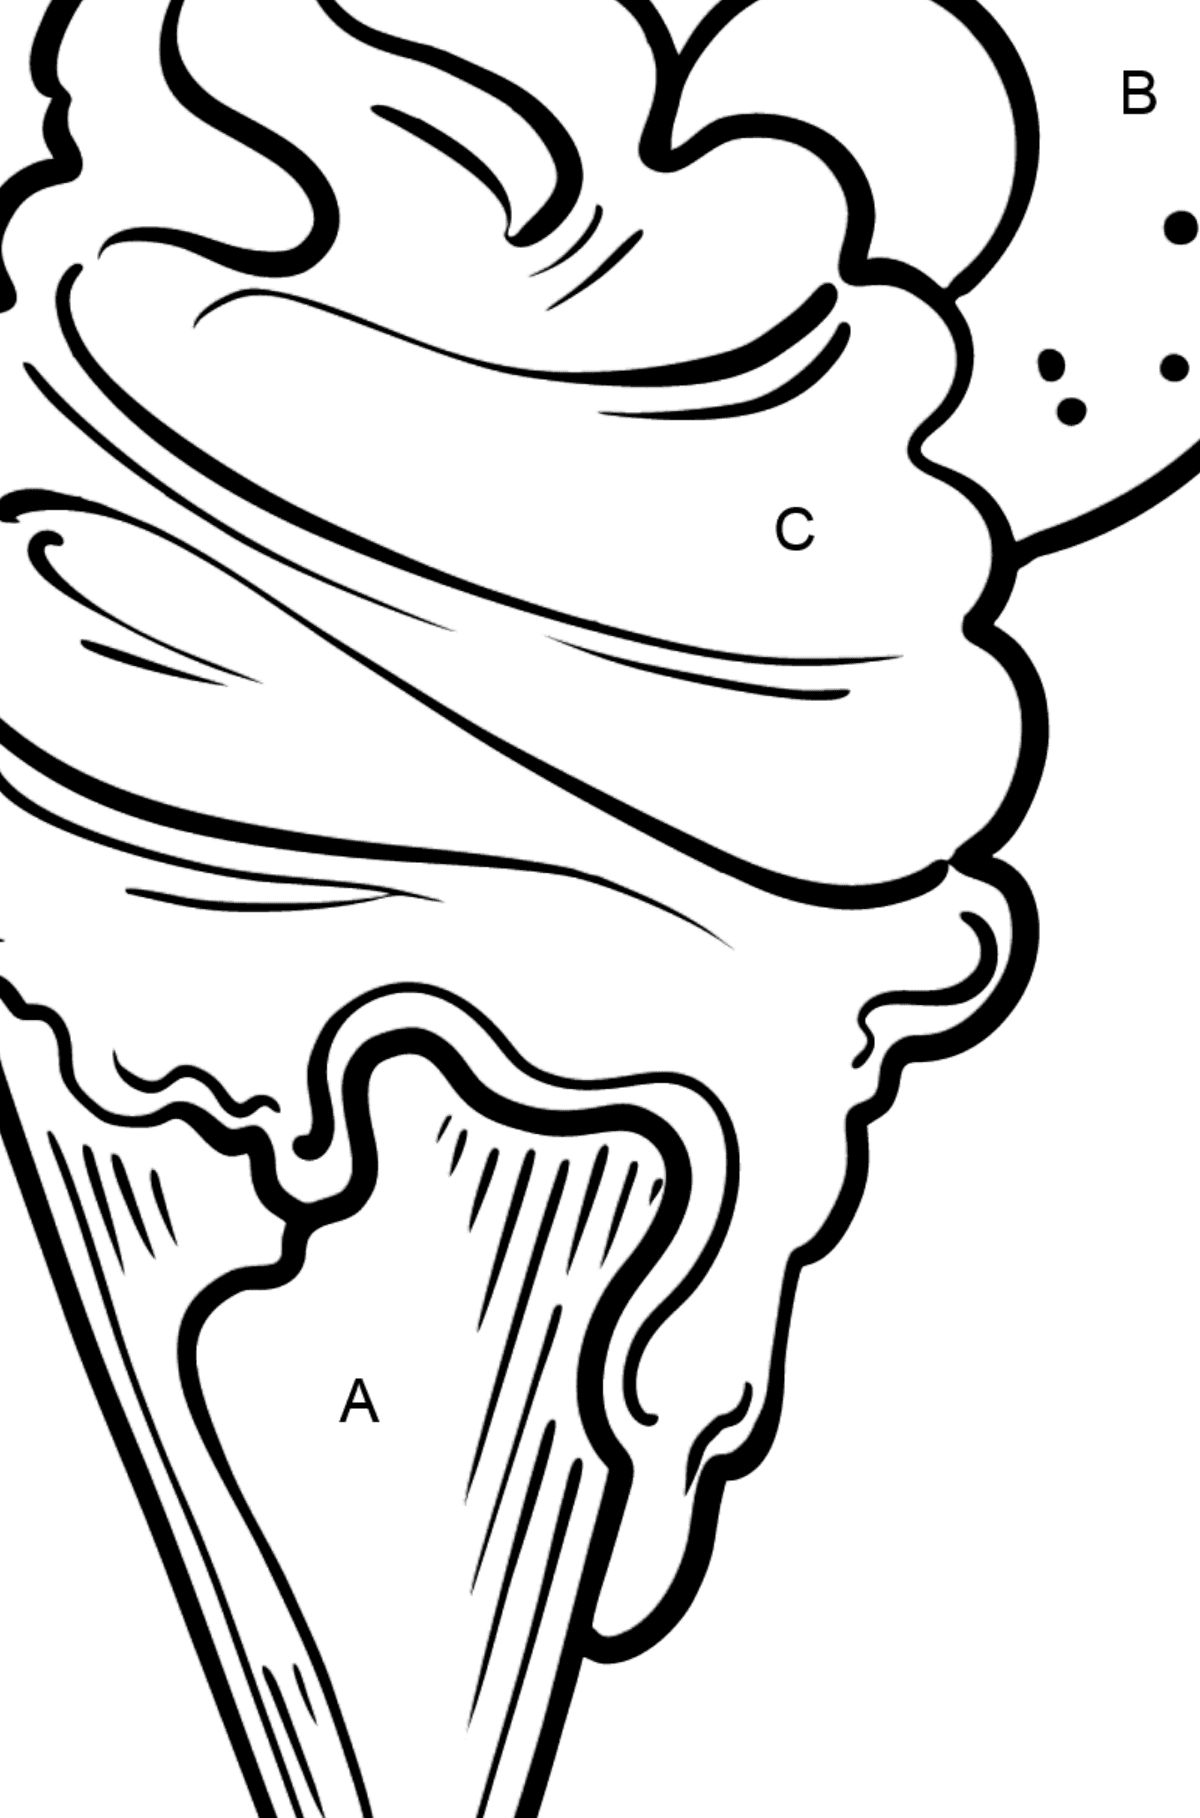 Ice Cream Cone and Pink Lollipop coloring page - Coloring by Letters for Kids